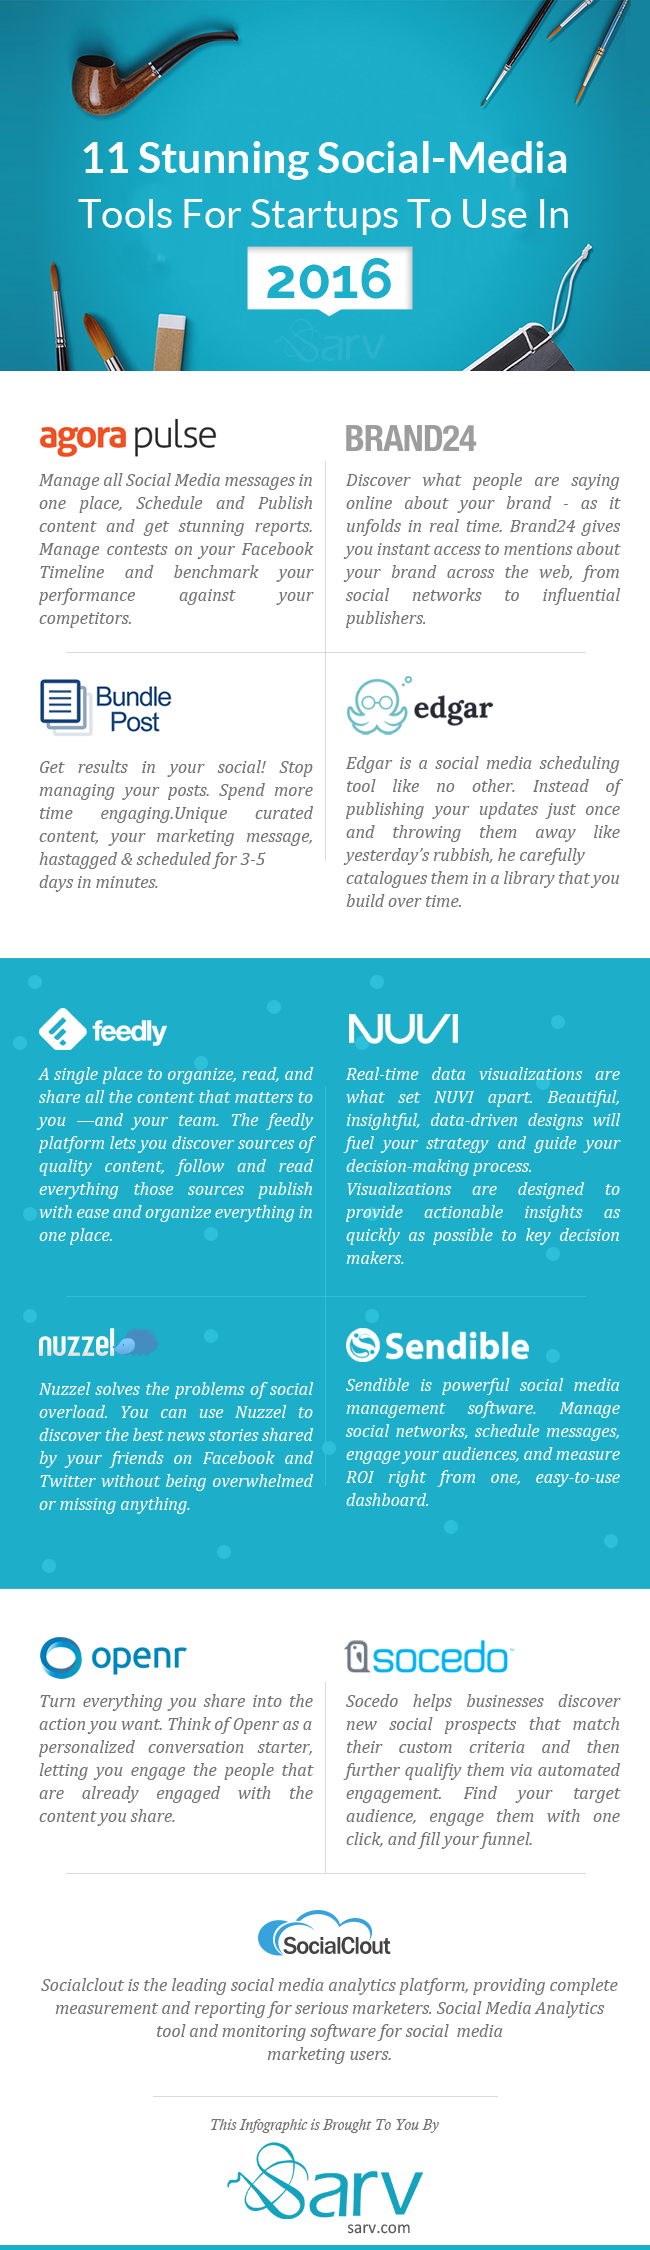 11-Stunning-Social-Media-Tools-For-Startups-To-Use-In-2016